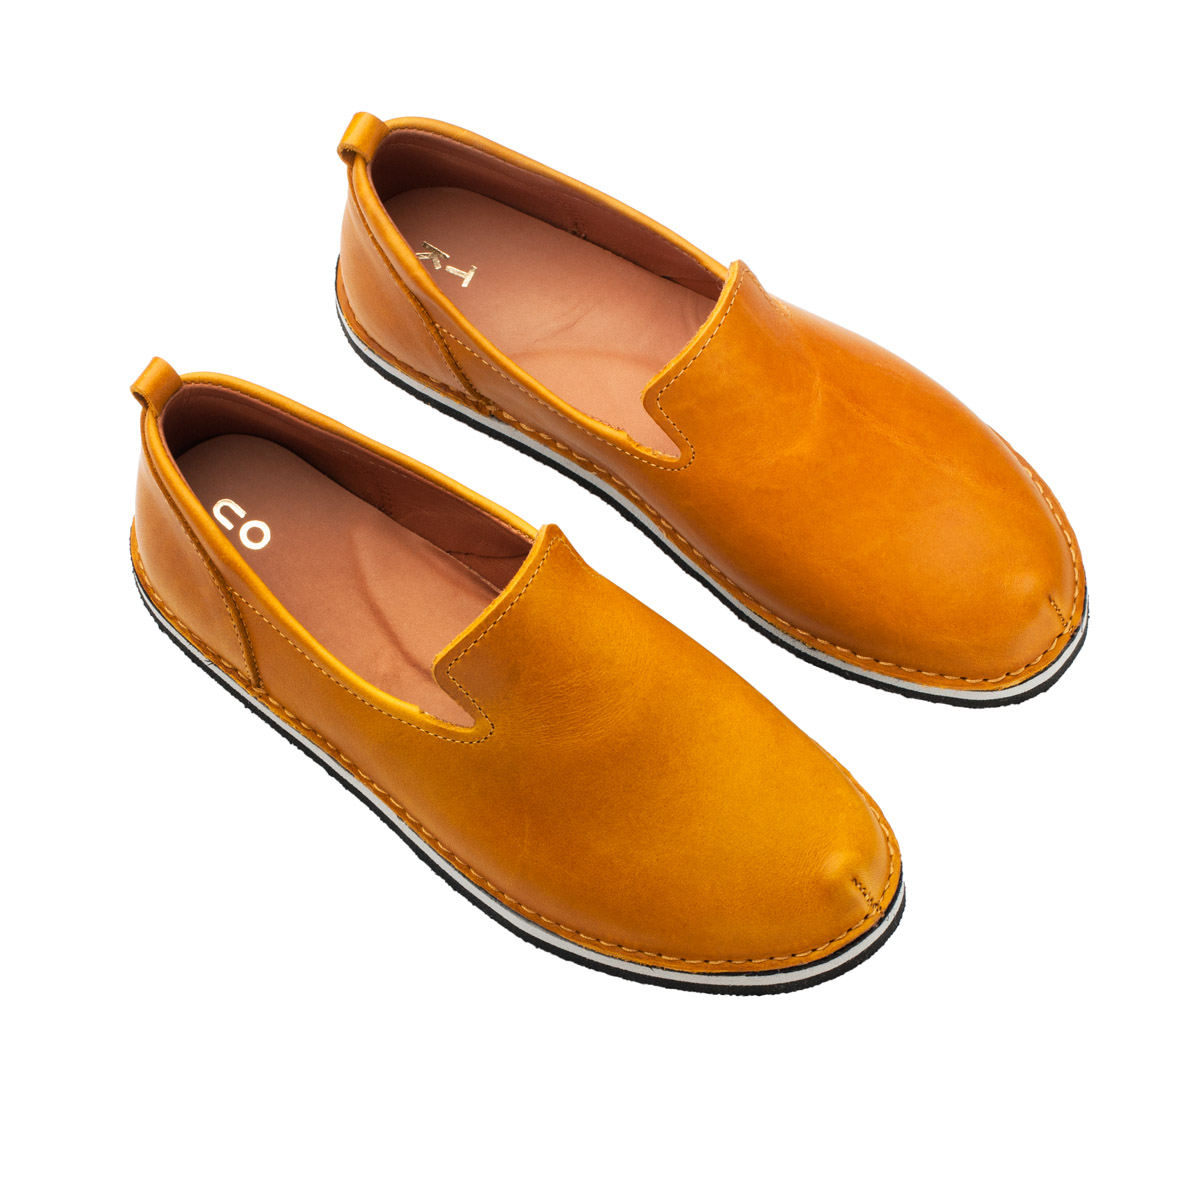 Classic loafer redefined